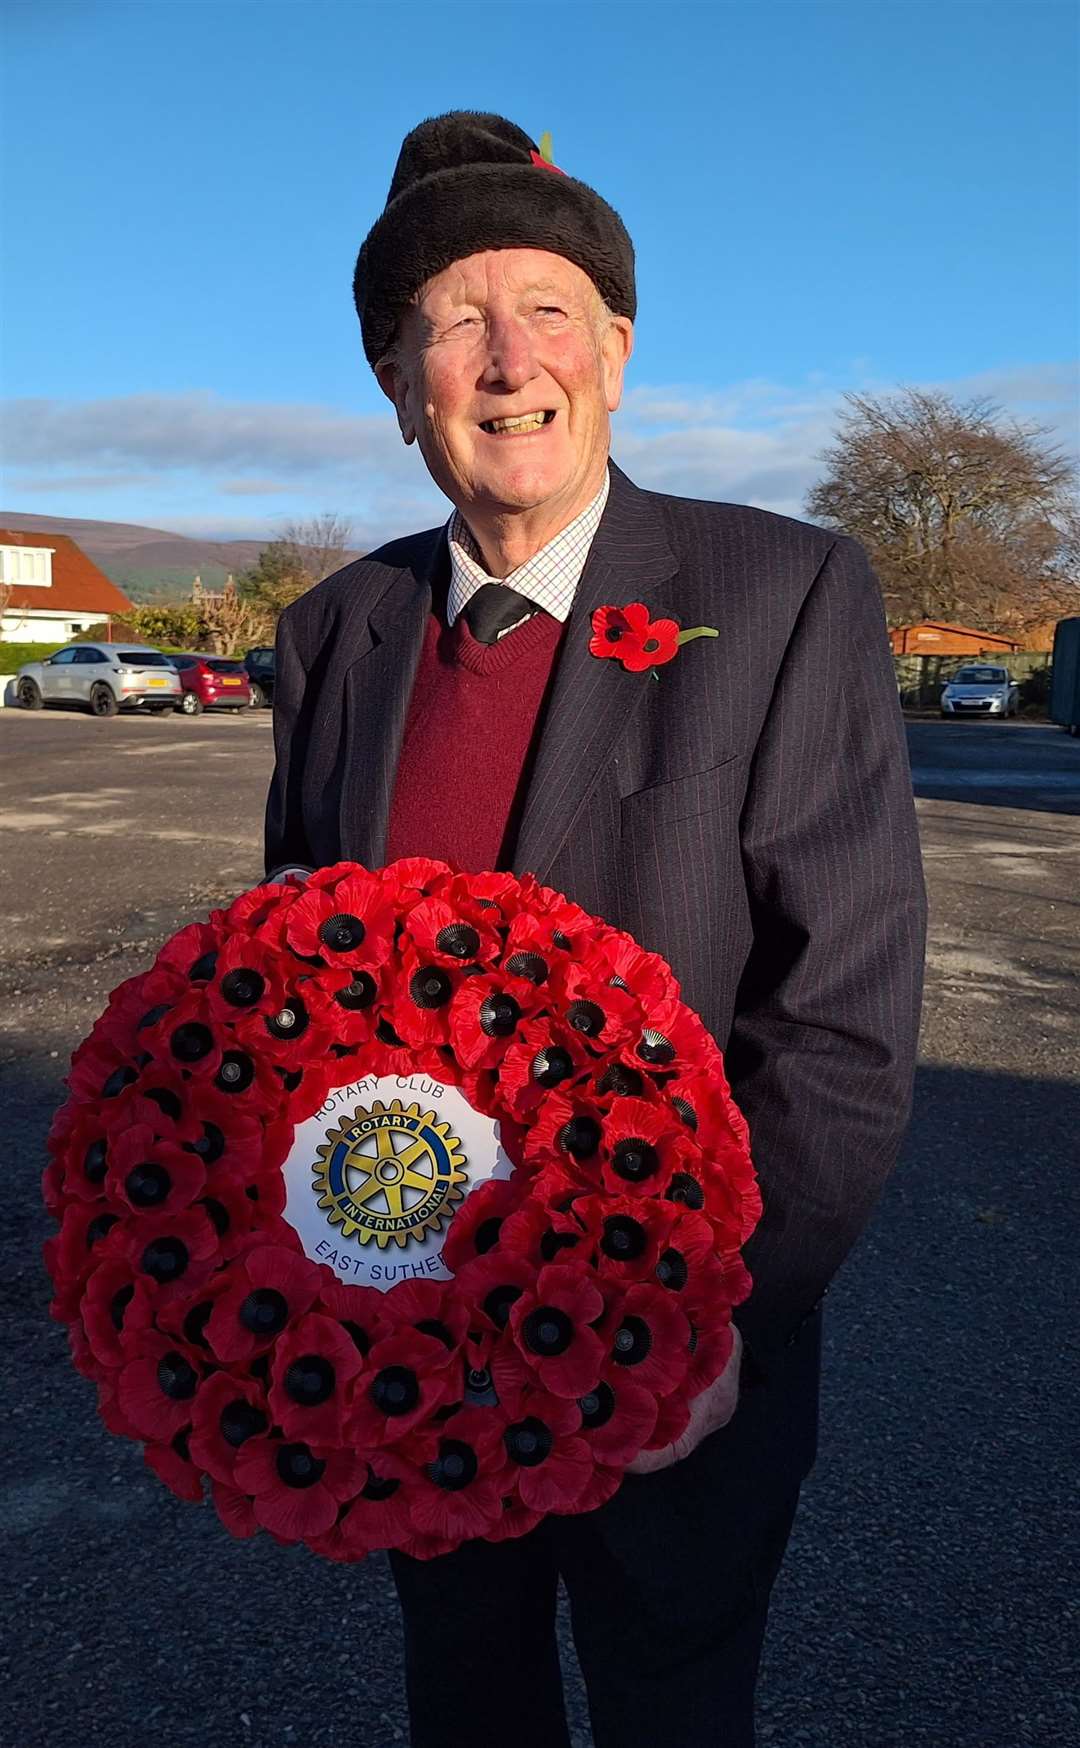 Alistair Risk laid a wreath on behalf of the Rotary Club of East Sutherland. The club lays six wreaths every year at Brors, Dornoch, Golspie, Helmsdale, Lairg and Bonar Bridge.